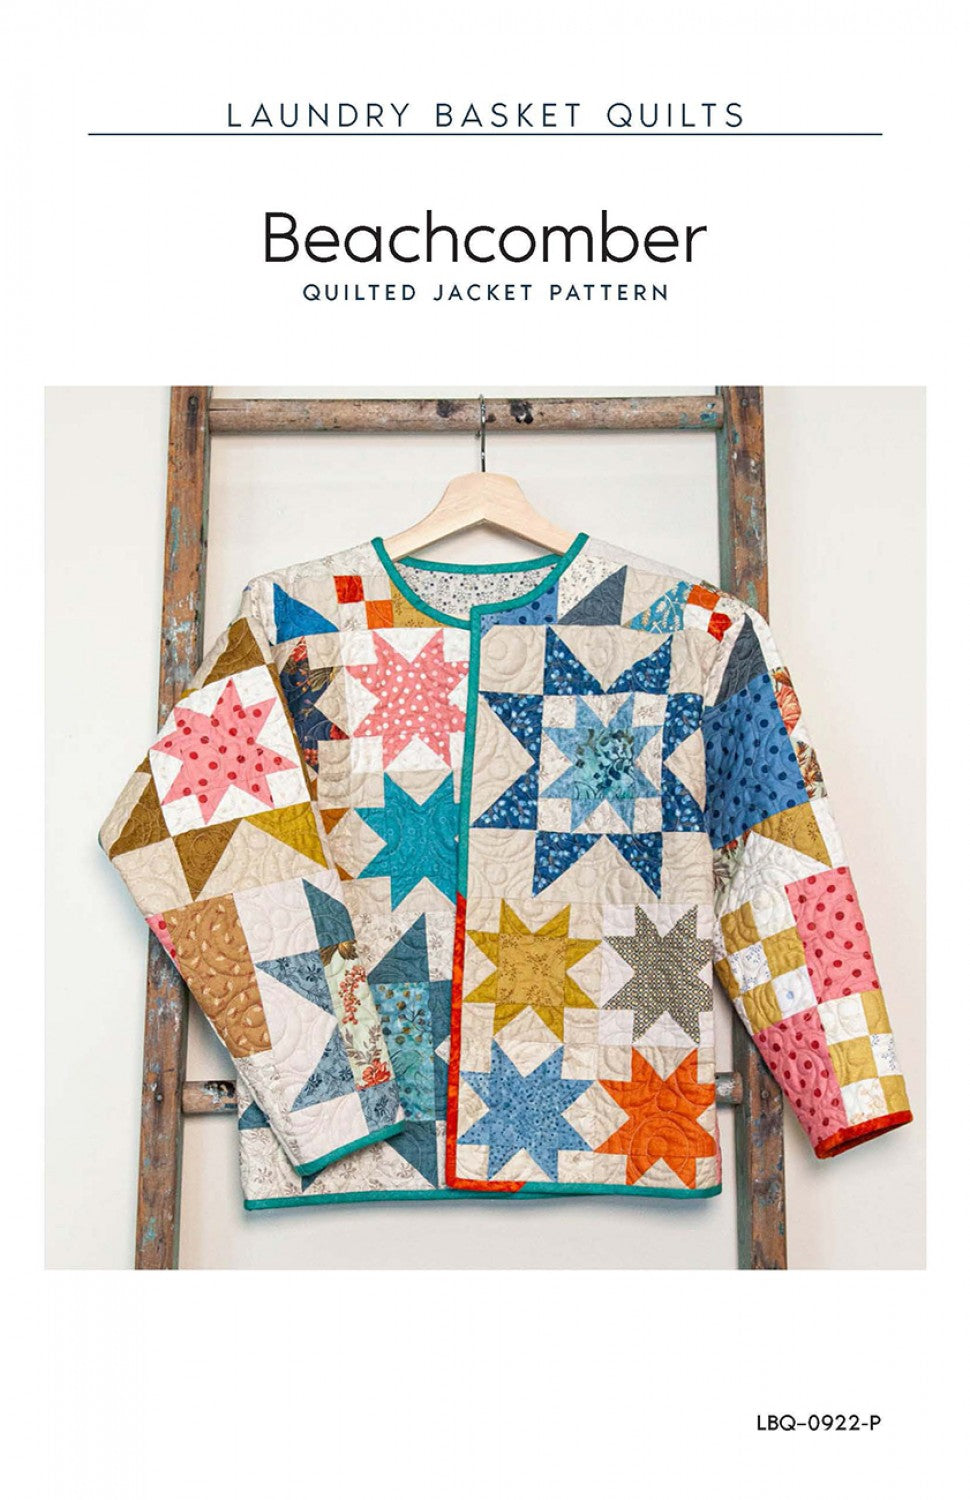 Beachcomber Quilted Jacket Pattern by Edyta Sitar for Laundry Basket Quilts